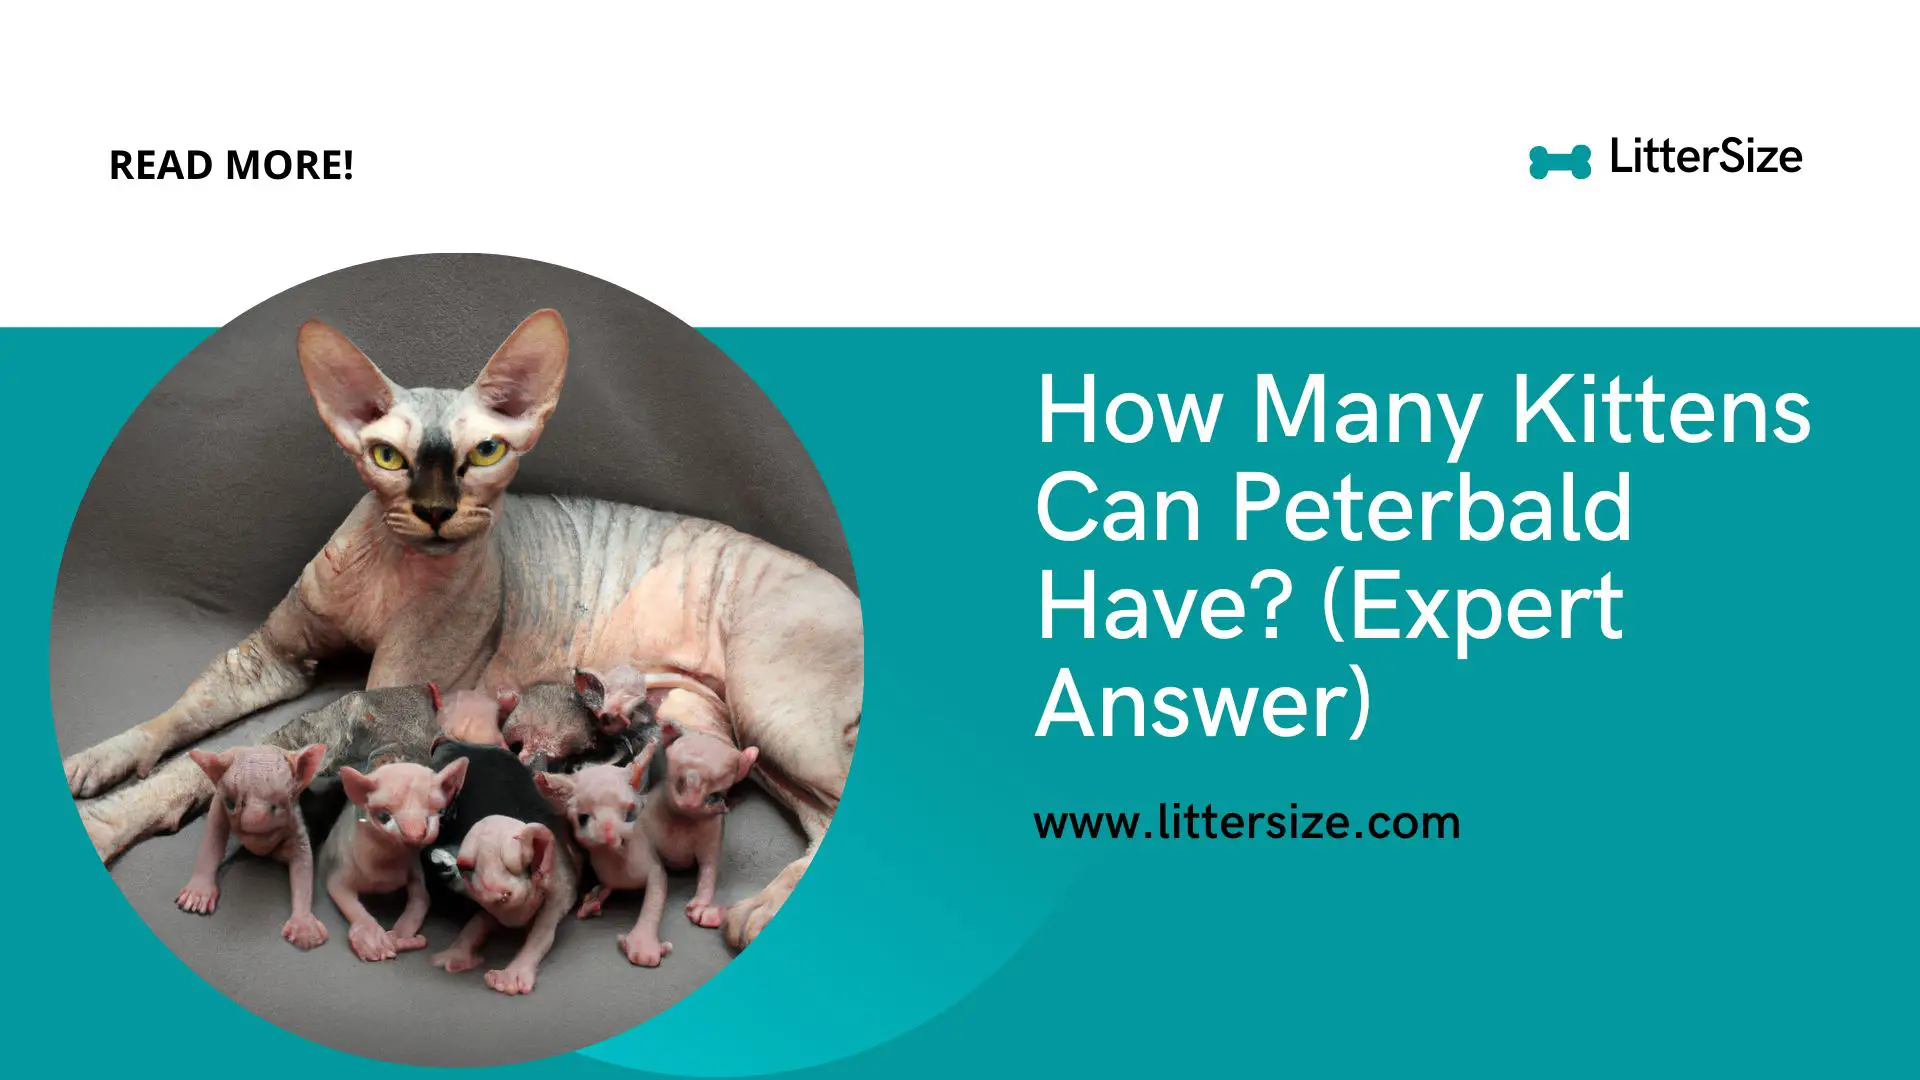 How Many Kittens Can Peterbald Have? (Expert Answer)